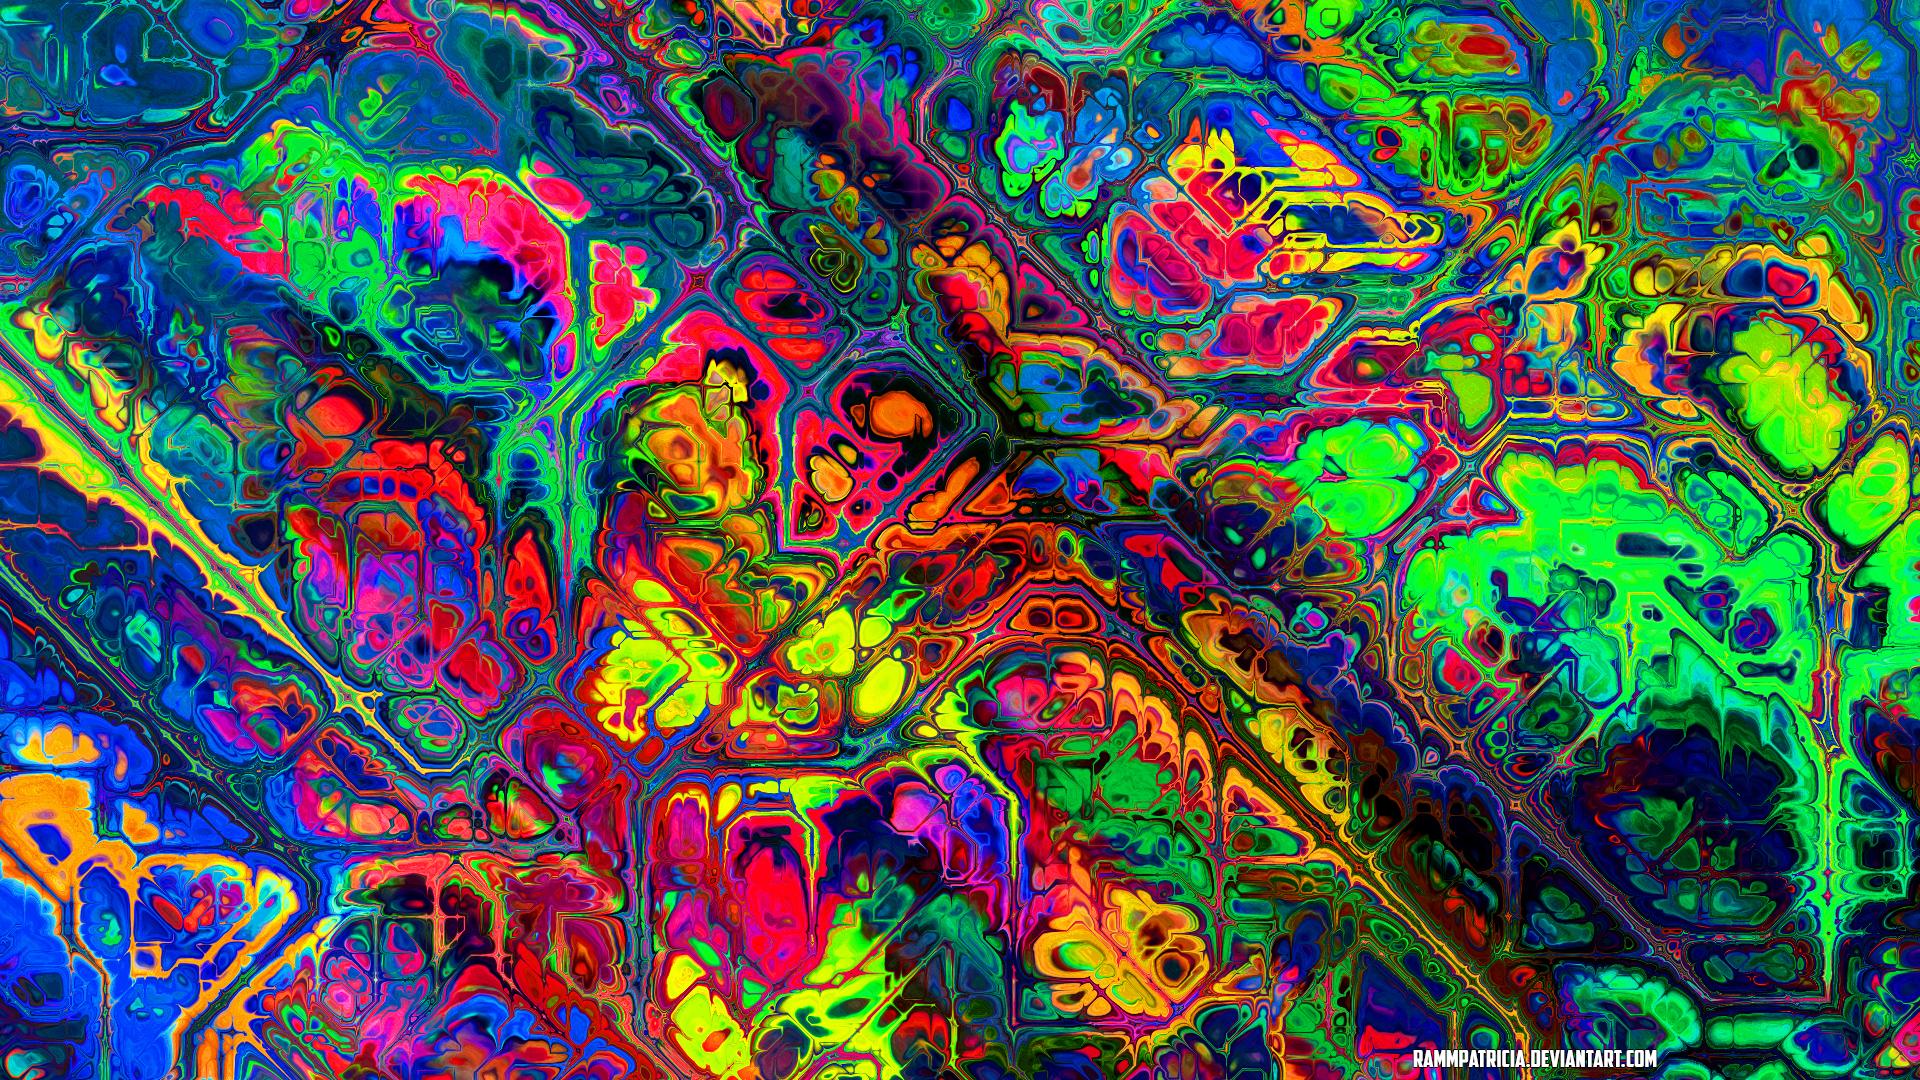 General 1920x1080 abstract colorful digital art RammPatricia watermarked